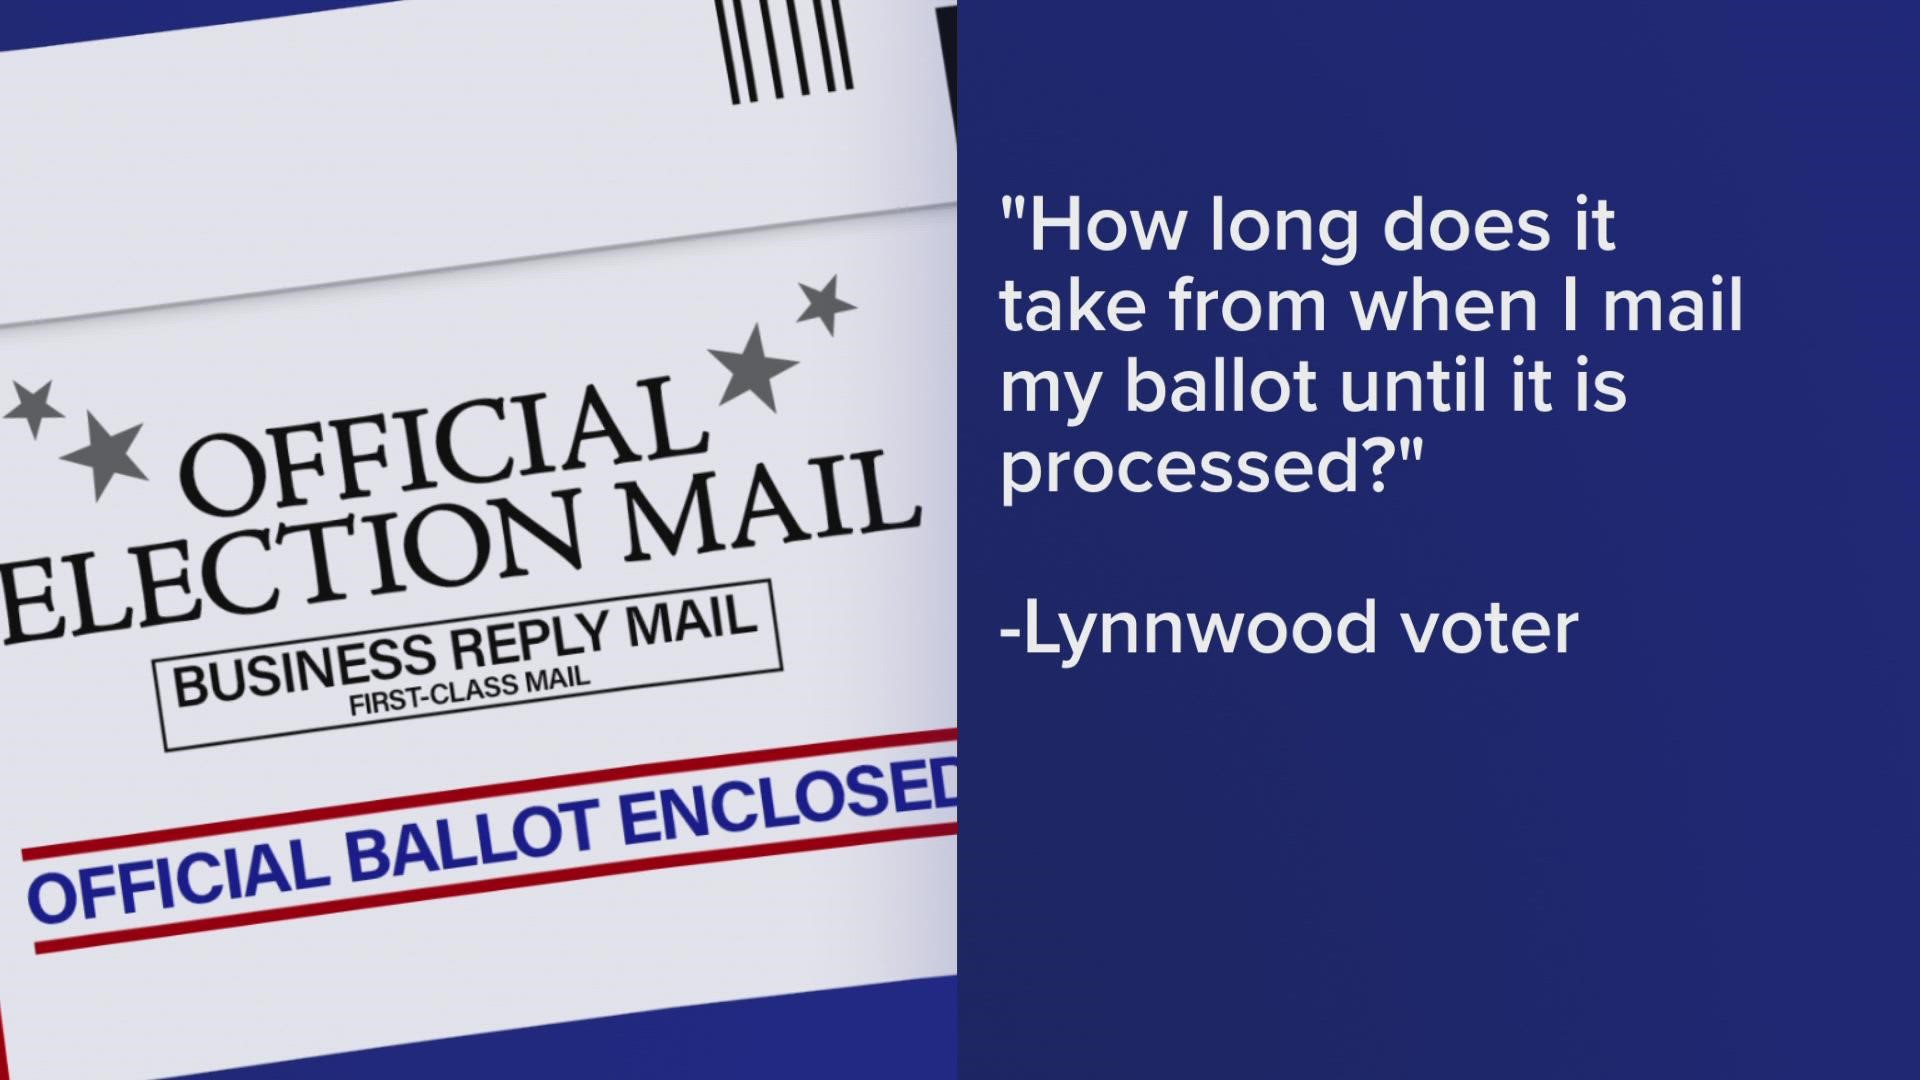 Once a ballot is received, it takes a day or two to be fully processed, before the results are stored until counted on election night.